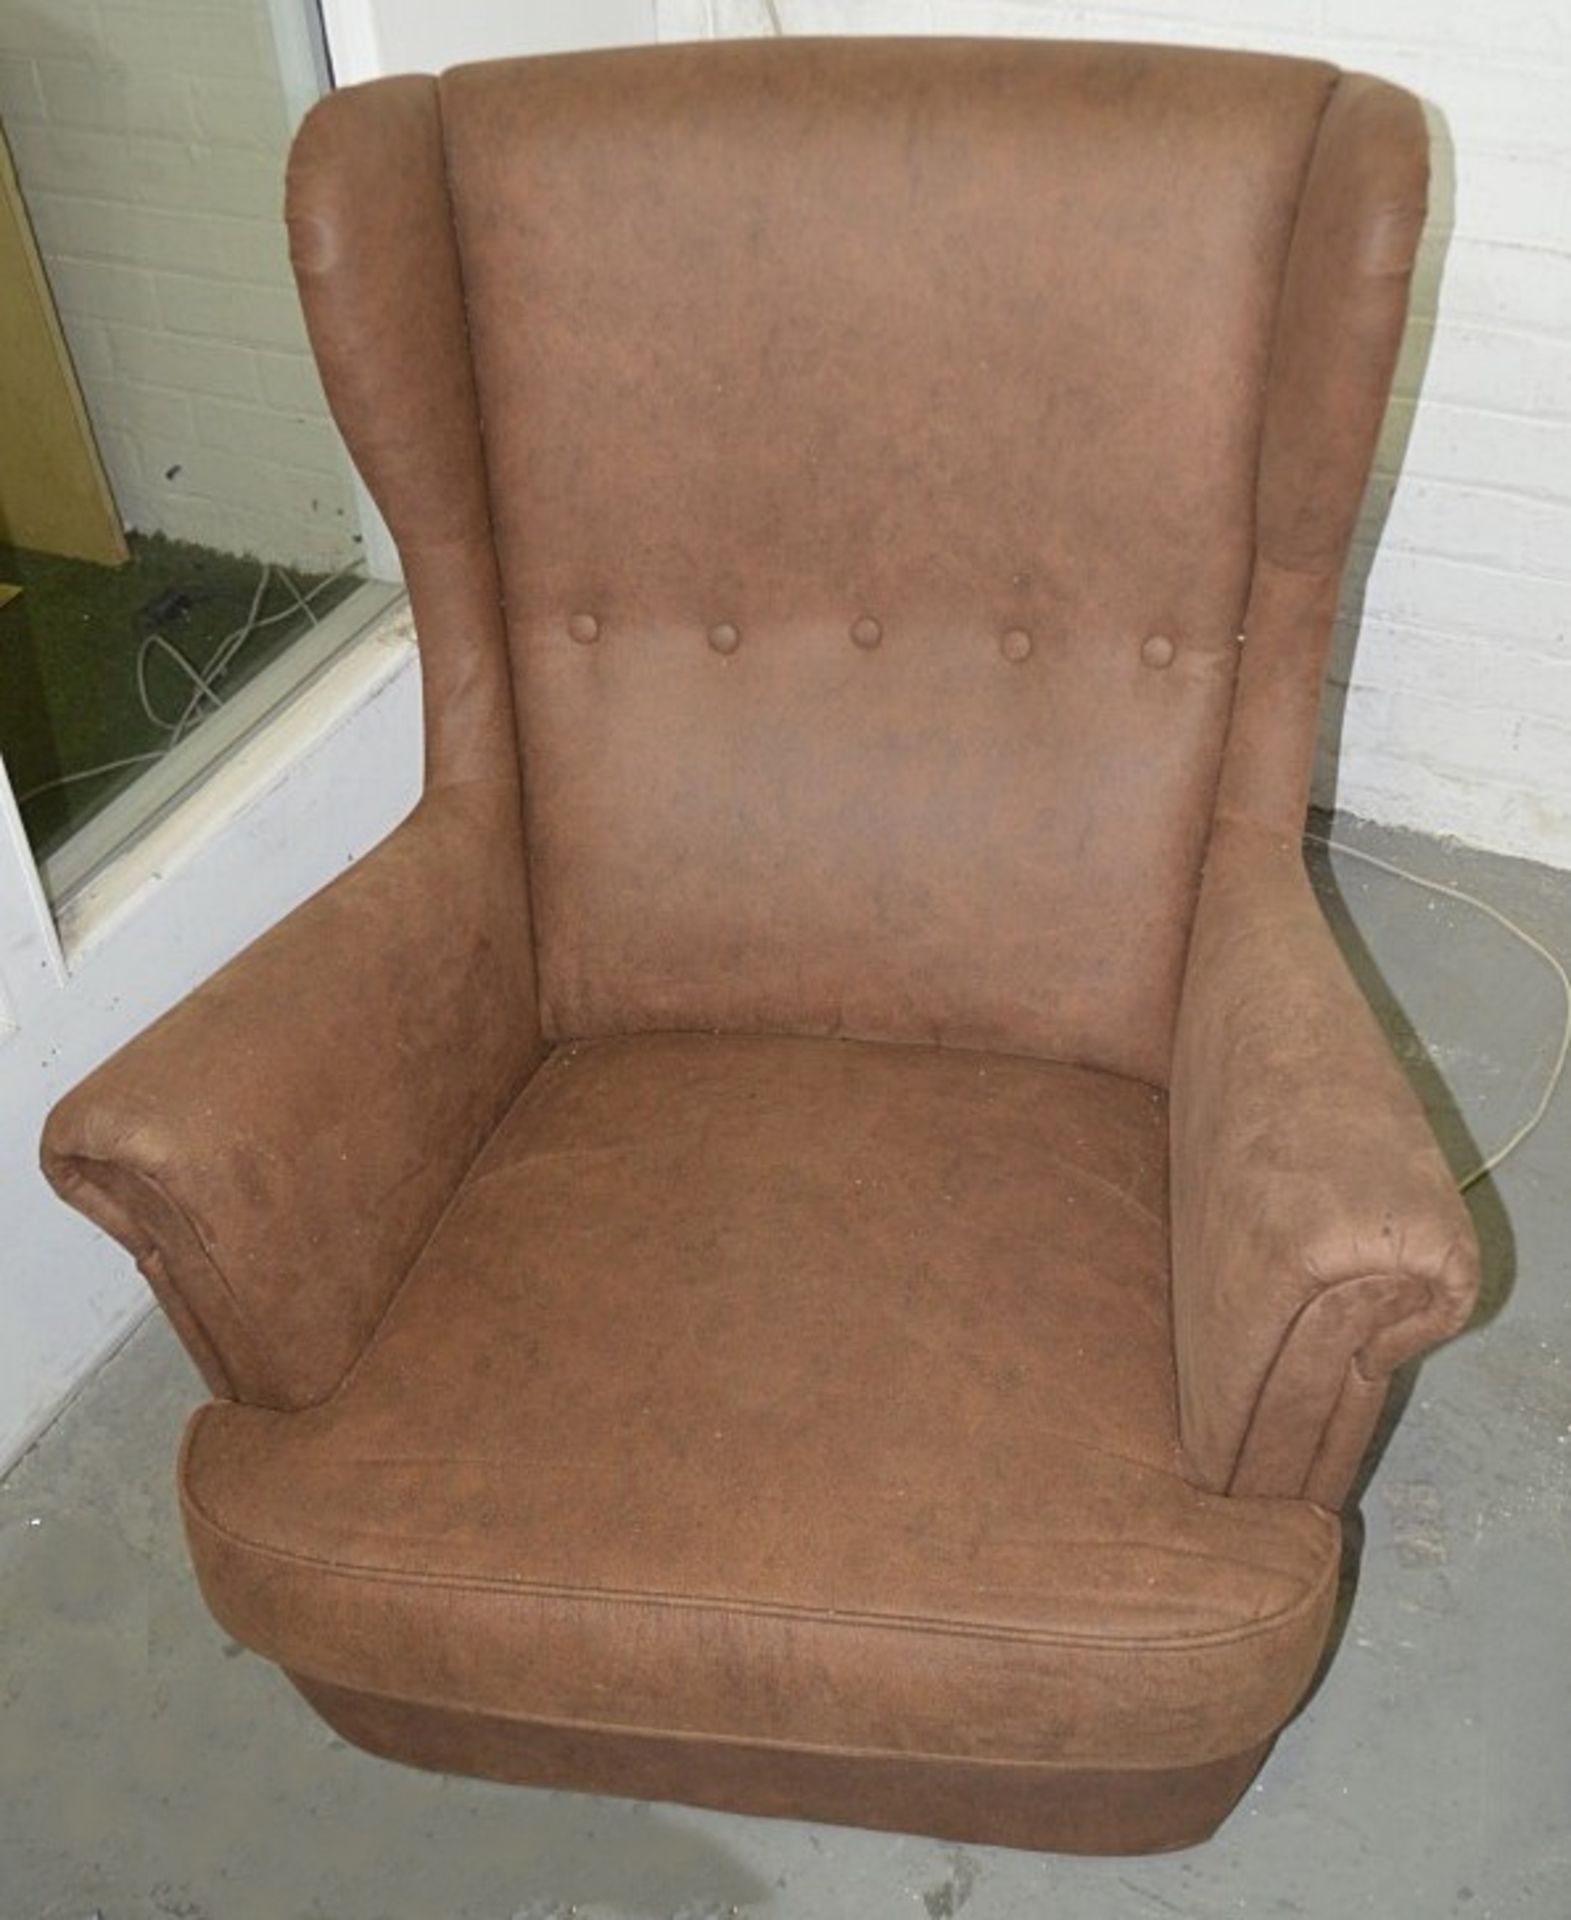 1 x Ikea STRANDMON Vintage-Style Upholstered Wing-back chair - Ex-display - Original RRP £250.00 - Image 5 of 7